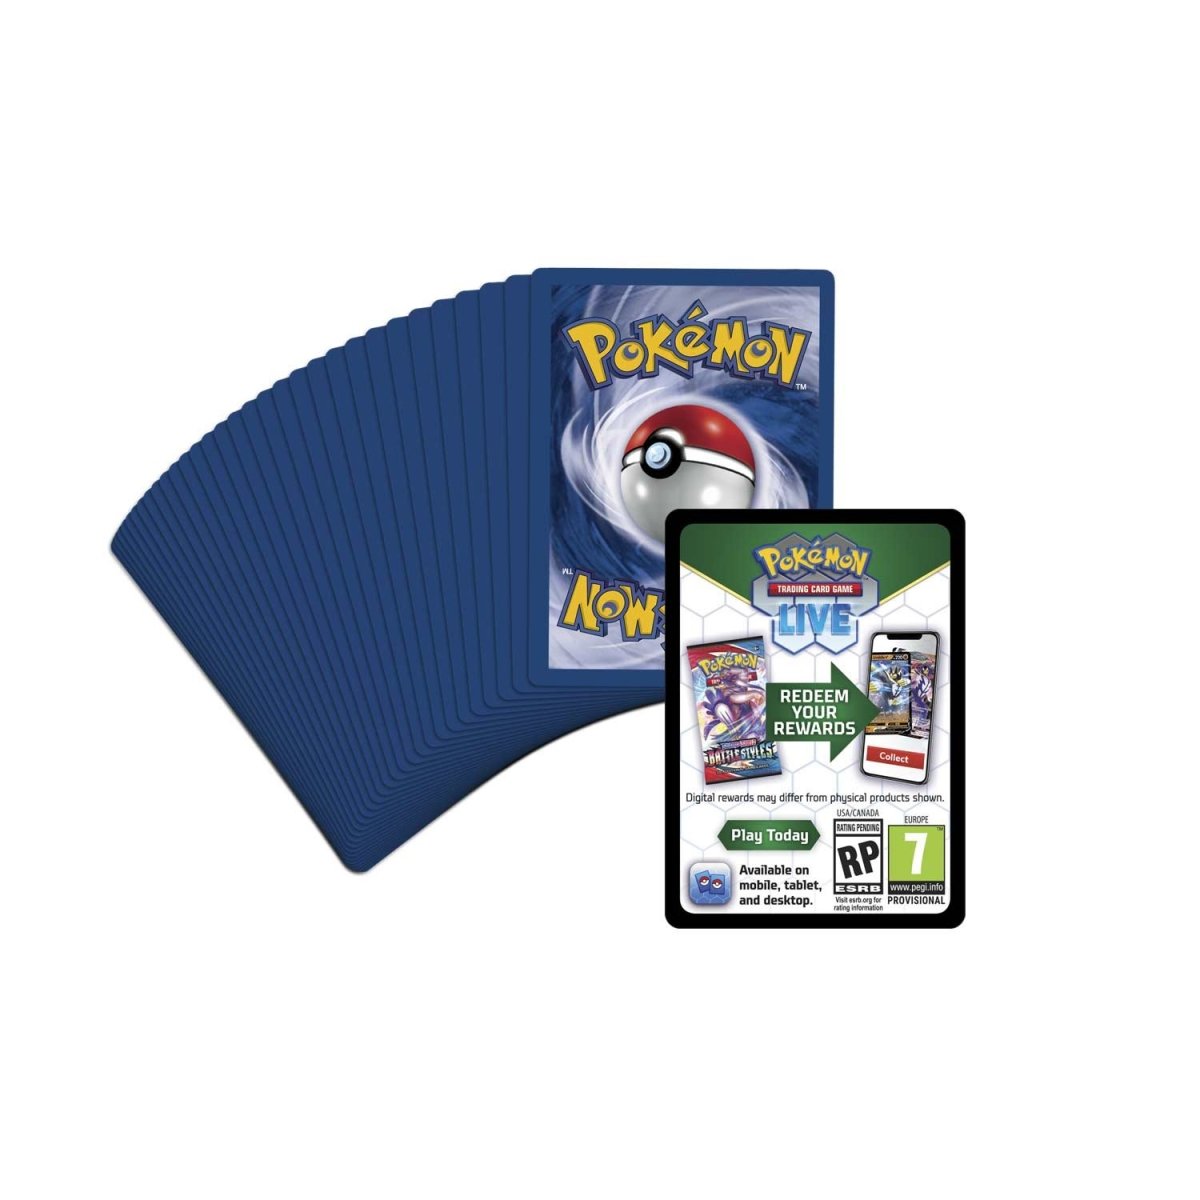 Pokemon Sword and Shield Brilliant Stars Build and Battle Box - 4 Booster  Packs